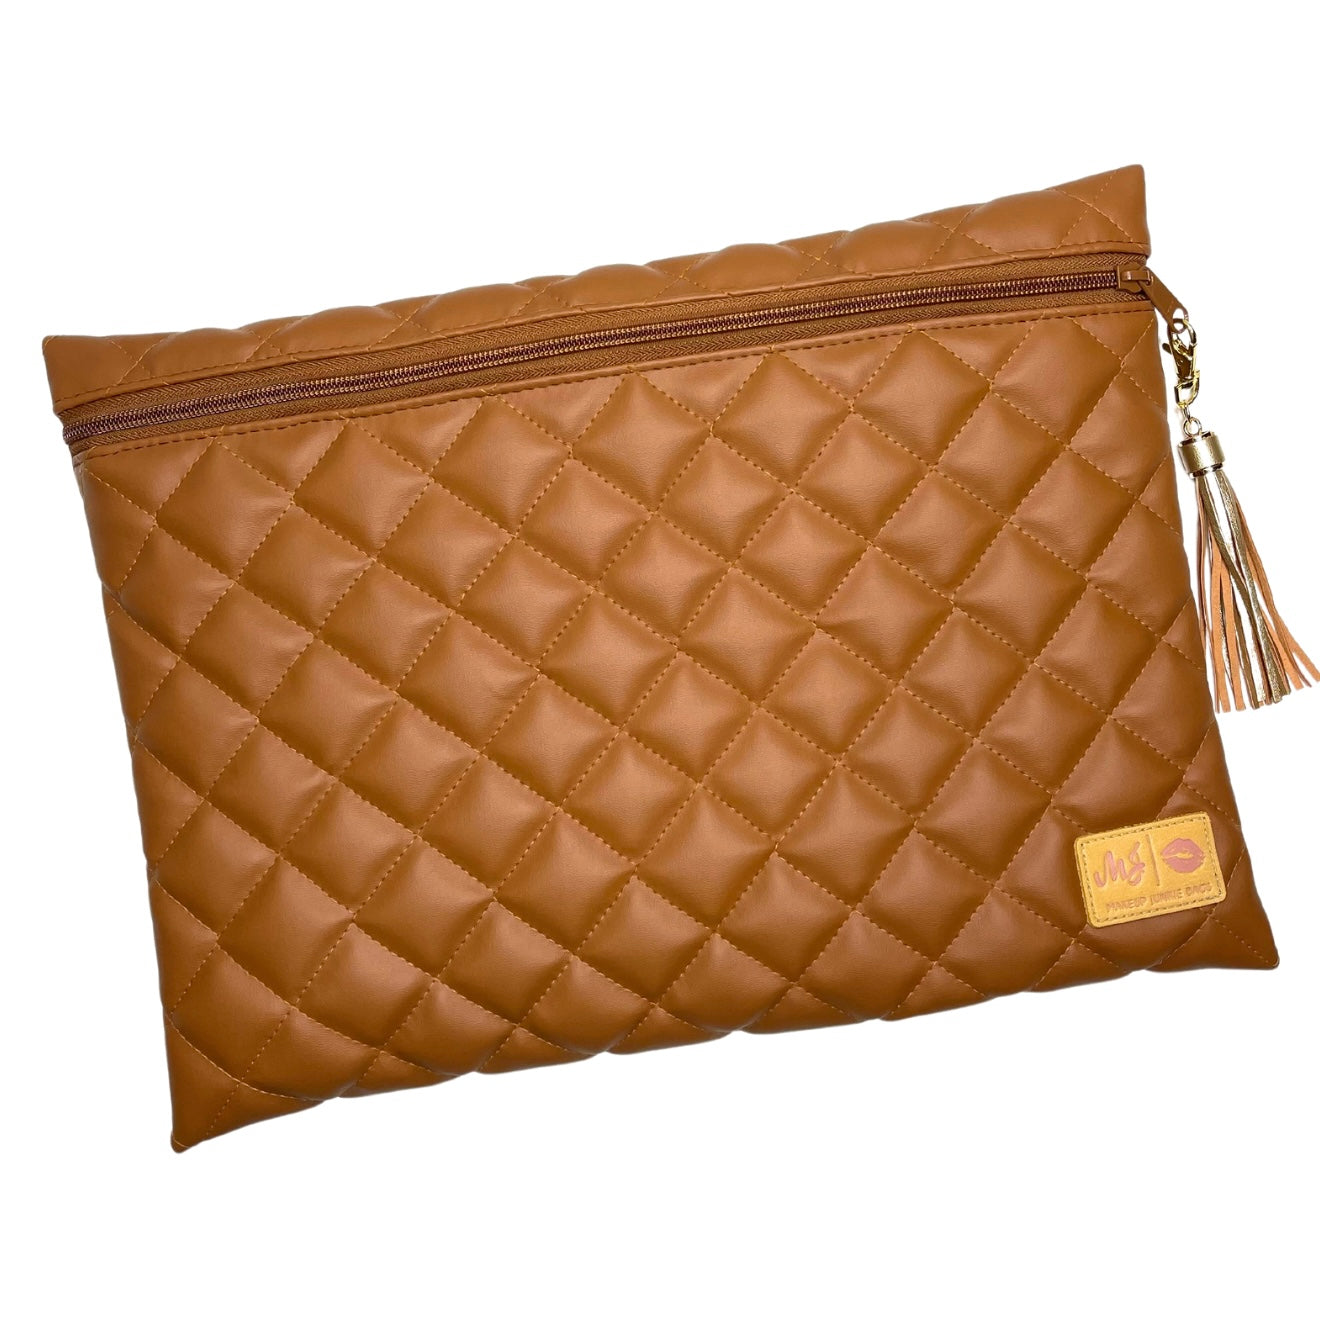 Live Takeover: Jumbo Top Zipper- Quilted Cognac by Makeup Junkie (Ships in 4-5 weeks)